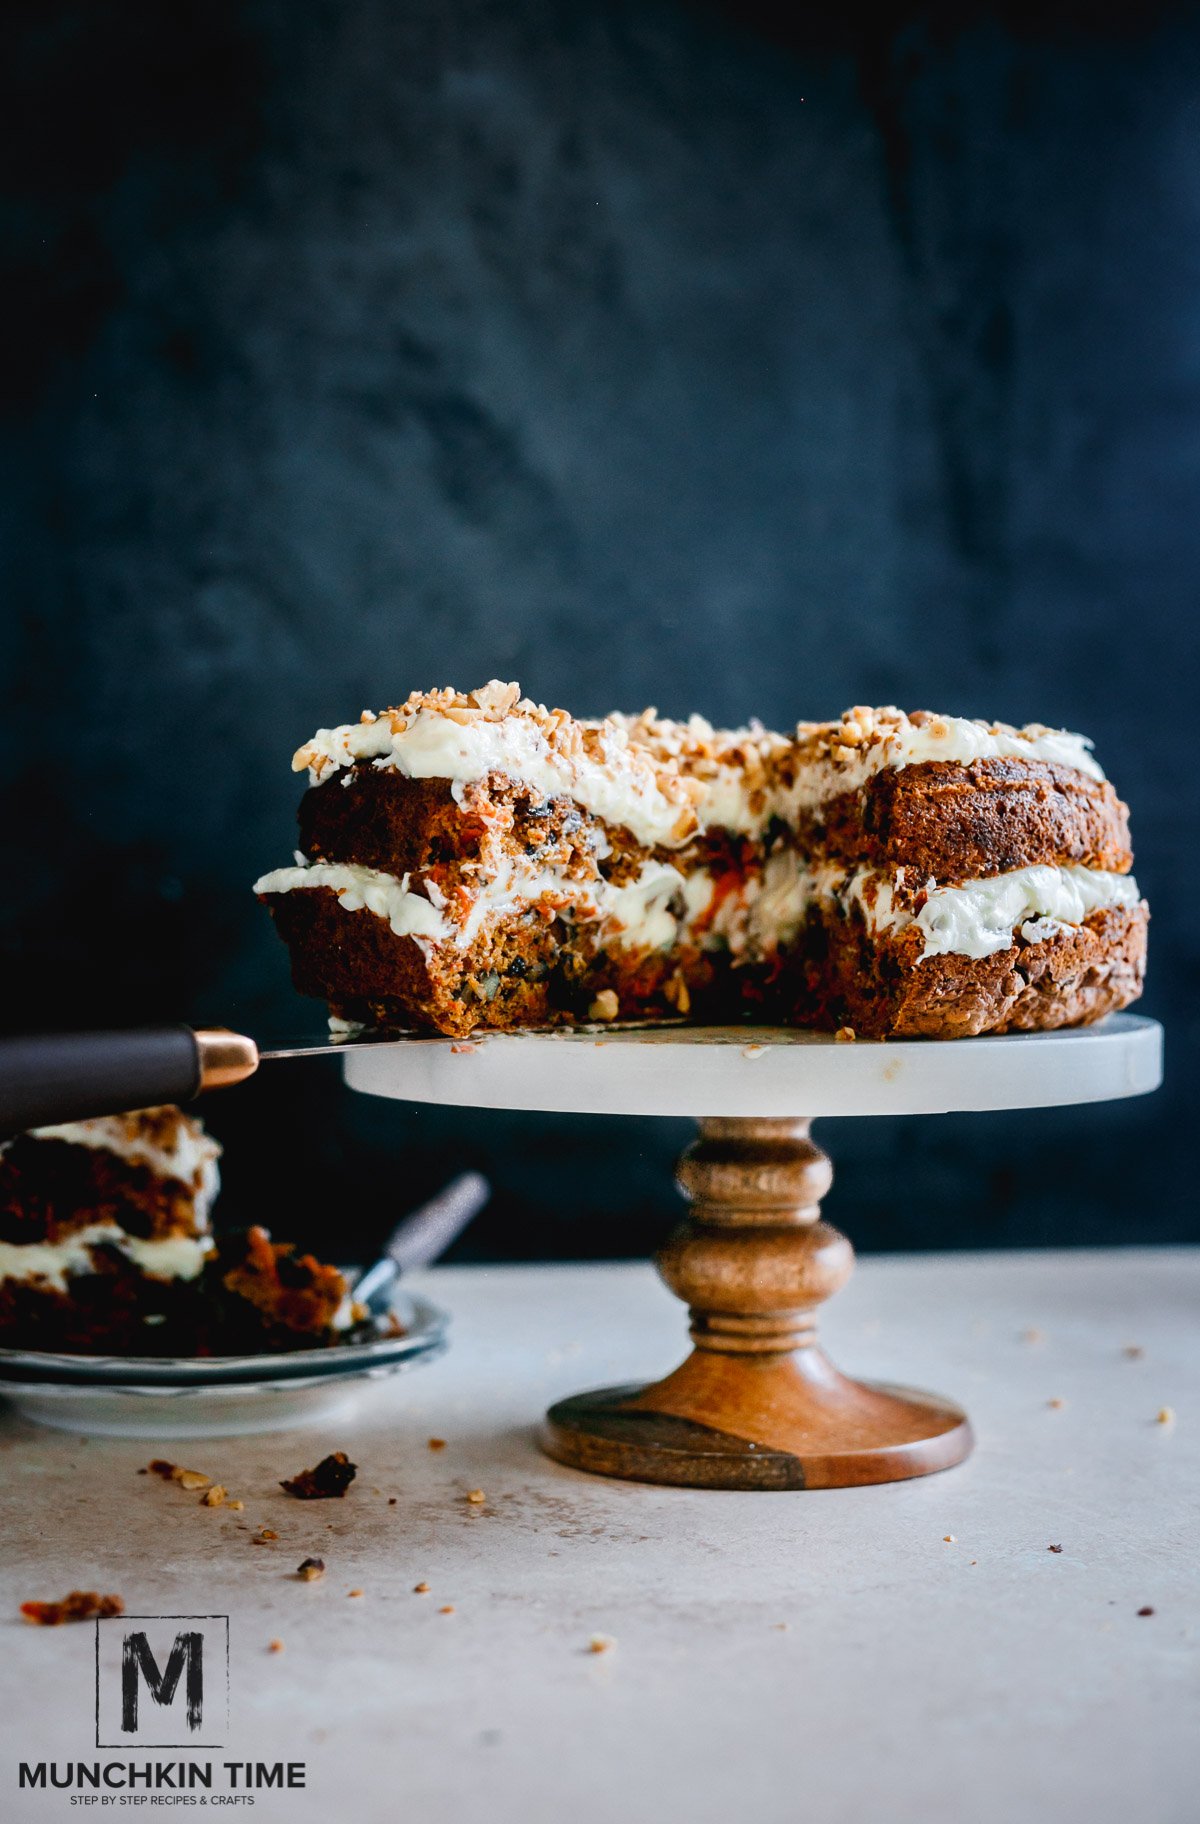 Best Carrot Cake Recipe From Scratch - a cut open carrot cake on a cake stand. Another slice on a plate next to the carrot cake.